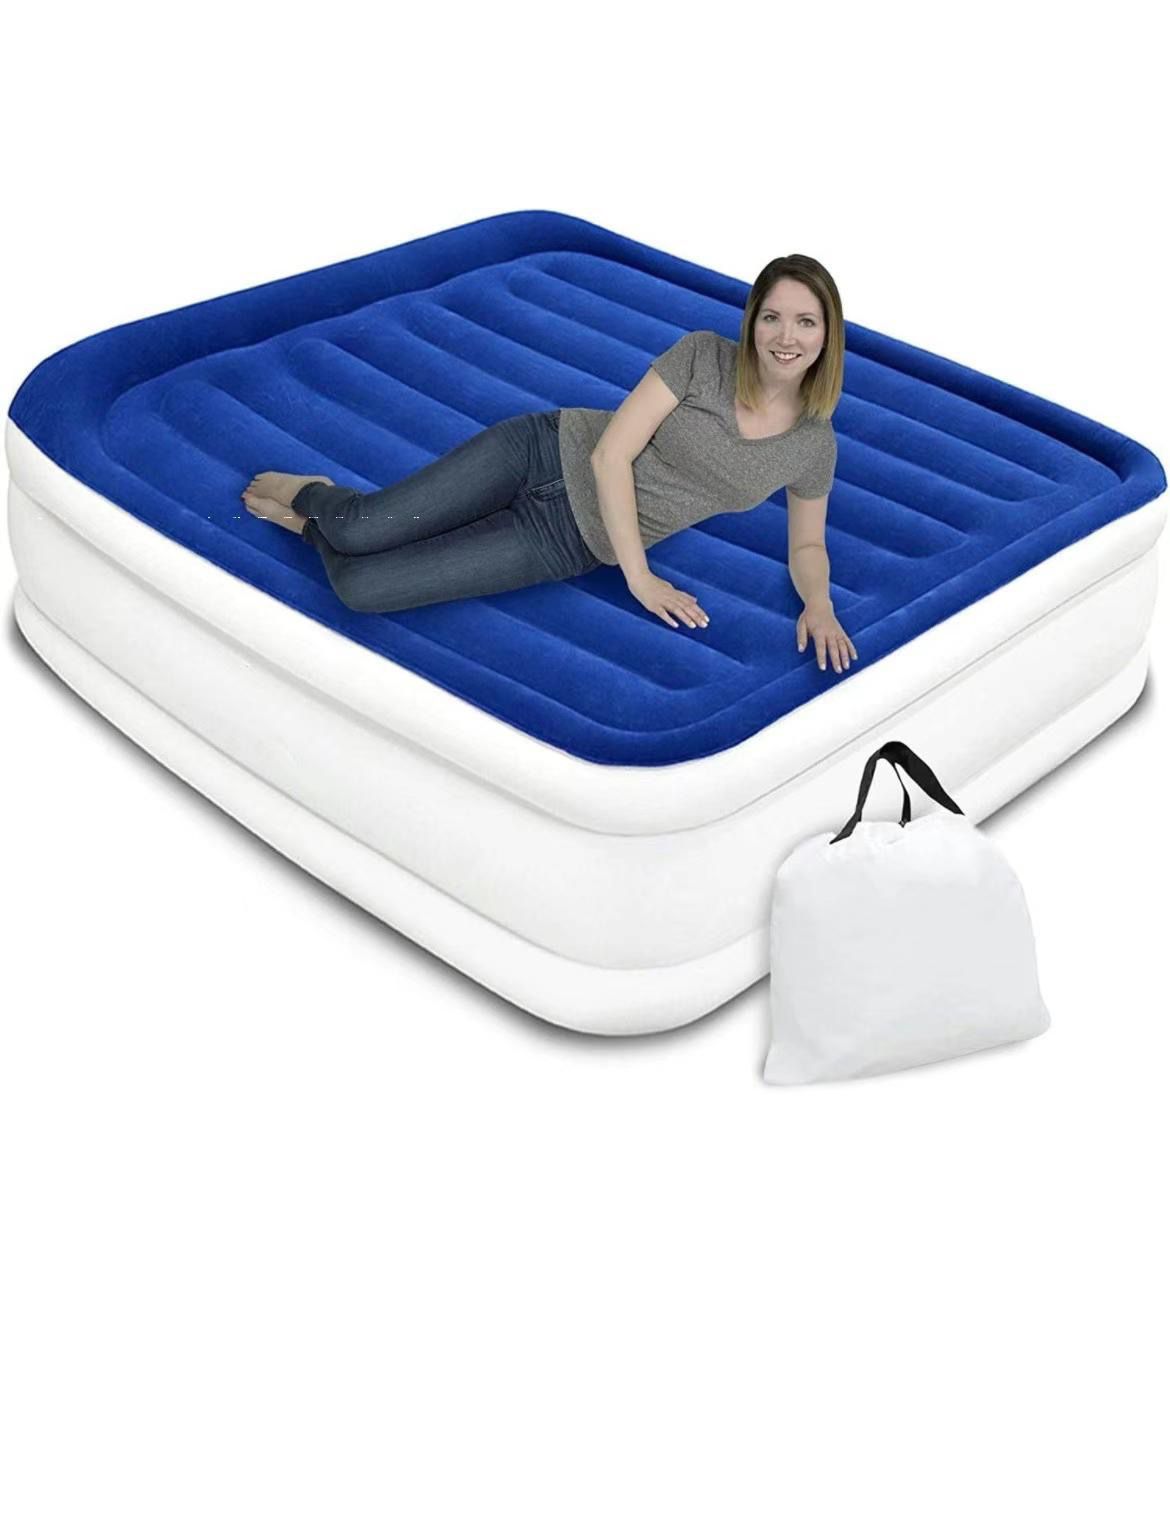 Queen Air Mattress with Built in Pump - 15" Luxury Size Self-Inflating Blow Up Mattress with Neck Support - Inflatable Air Bed for Portable Travel & H